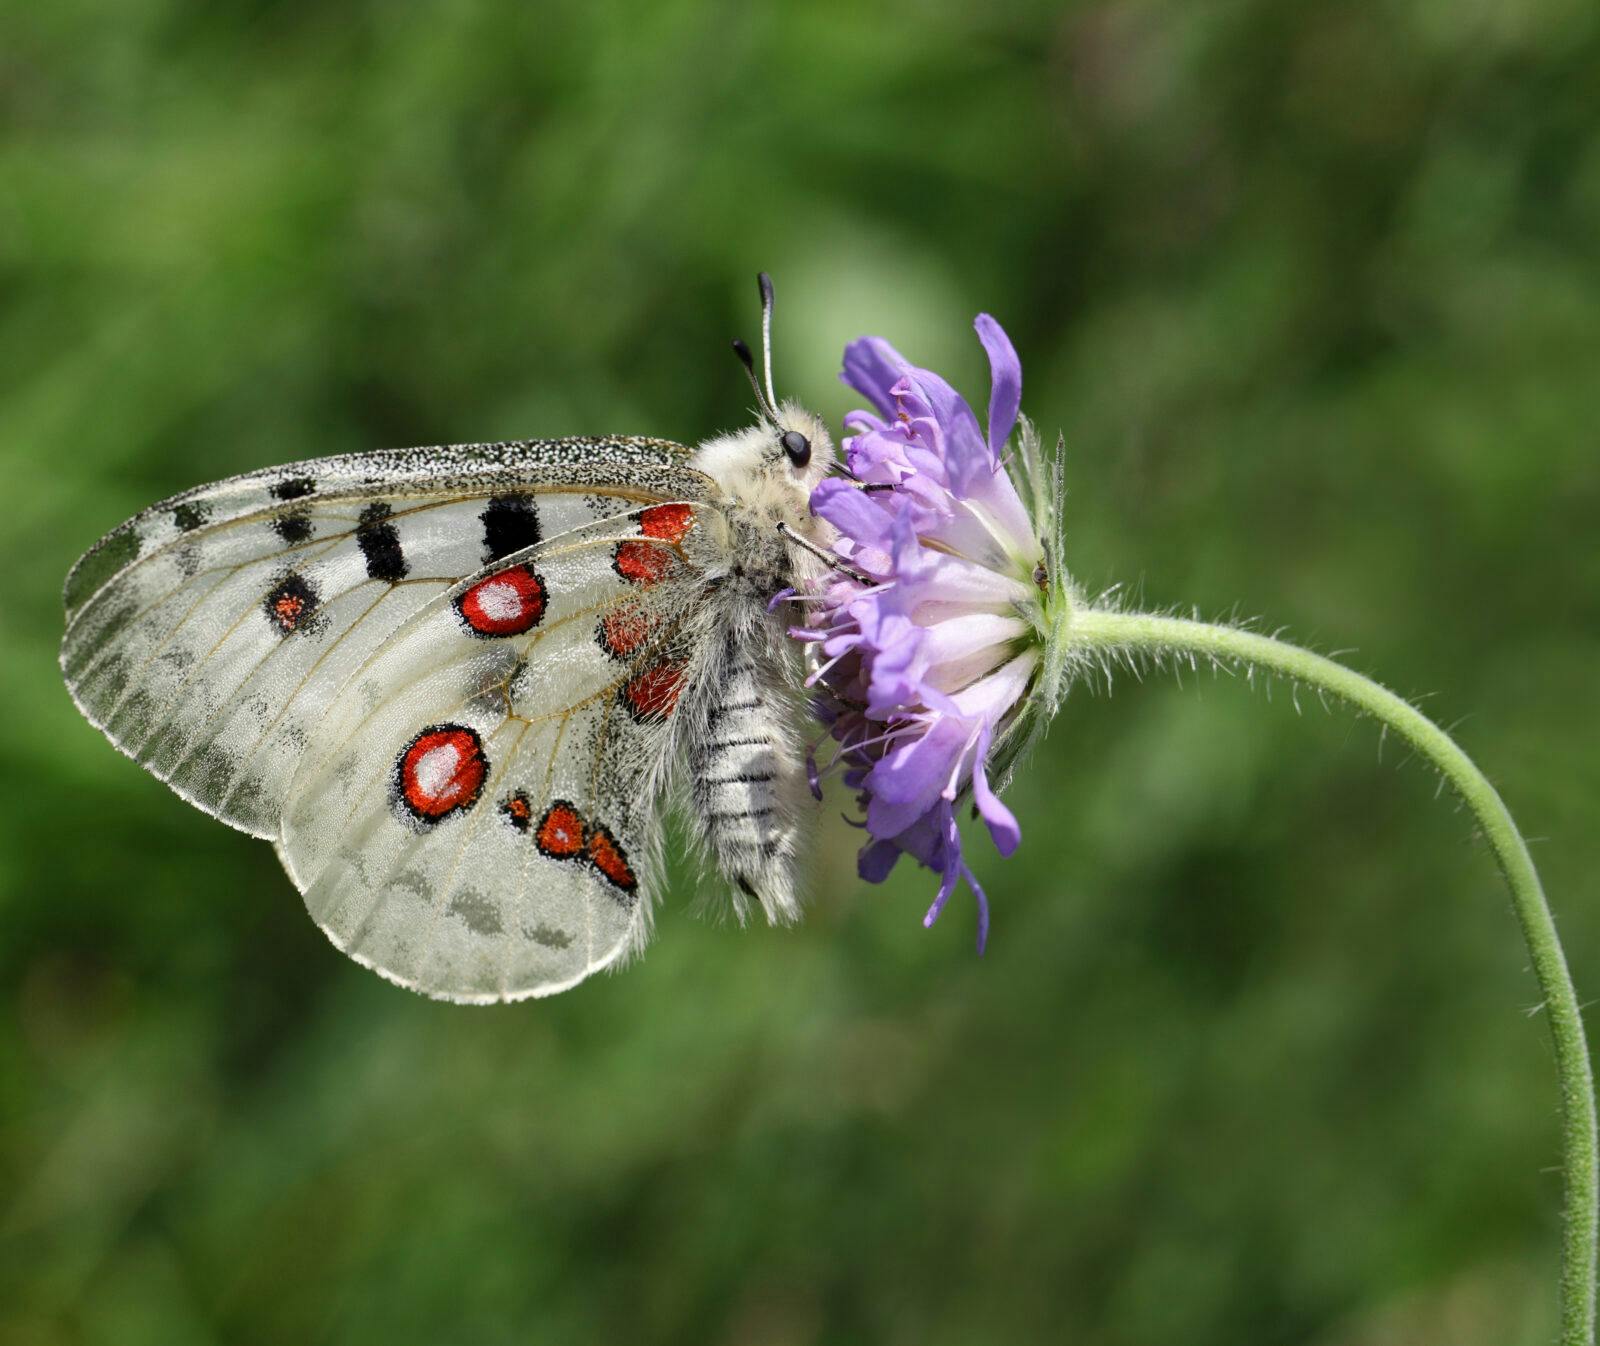 "Pincushion Flower, Animal, Animals And Pets, Apollo Butterfly, Butterfly, Day, Endangered Species, Flower, Flowers", Insect, Insects, Mountain Apollo, Nature, One Animal, Outdoors, Scabious, Side View, Single Flower, Sucking, Wild Animals, Wildflower, apollofjäril, fjäril, apollo, blomma, biologisk mångfald, insekt, pollinering, fridlyst,